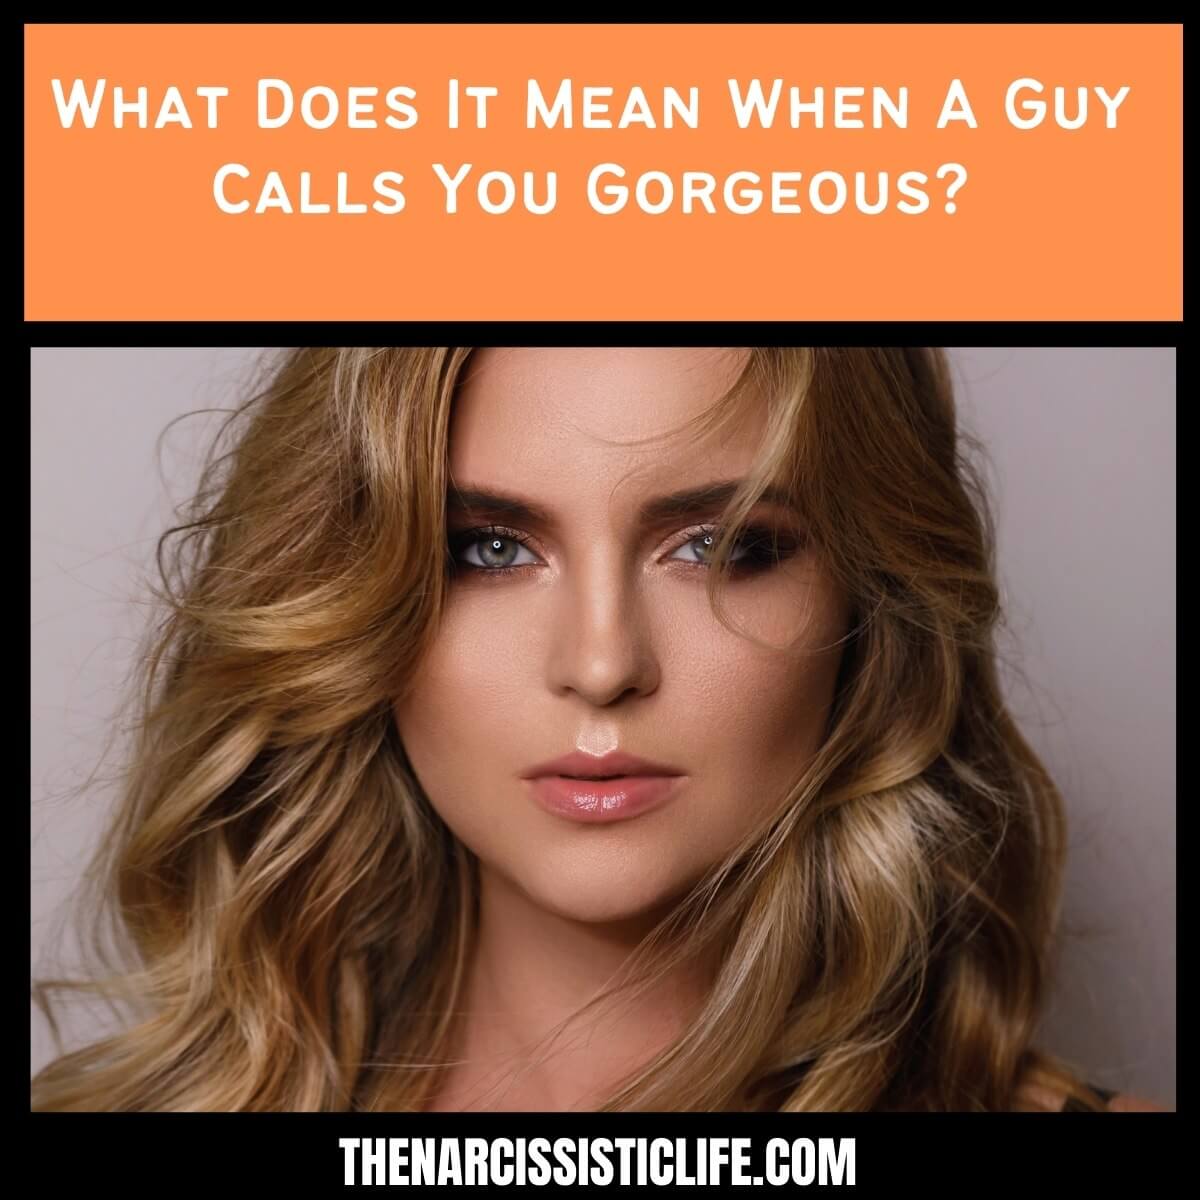 What Does It Mean When A Guy Calls You Gorgeous